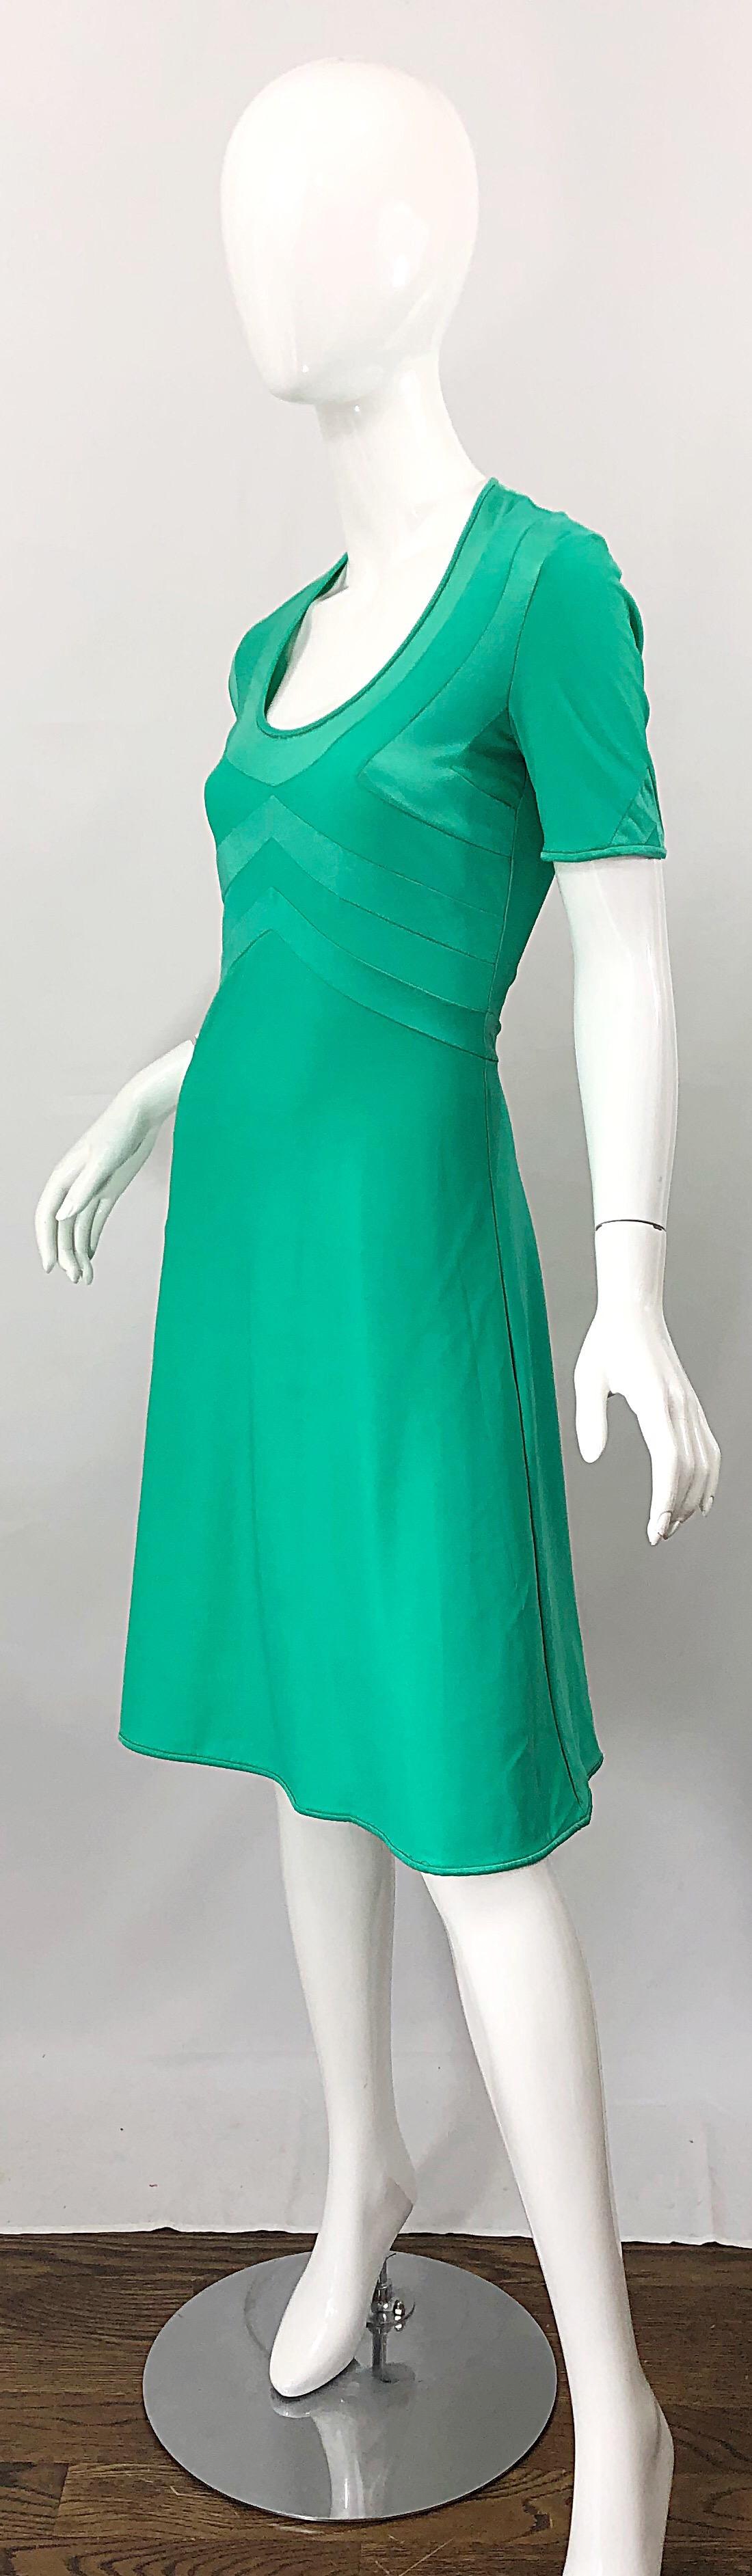 1970s Giorgio di Sant Angelo Kelly Green Slinky Bodysuit 70s Vintage Dress In Excellent Condition For Sale In San Diego, CA